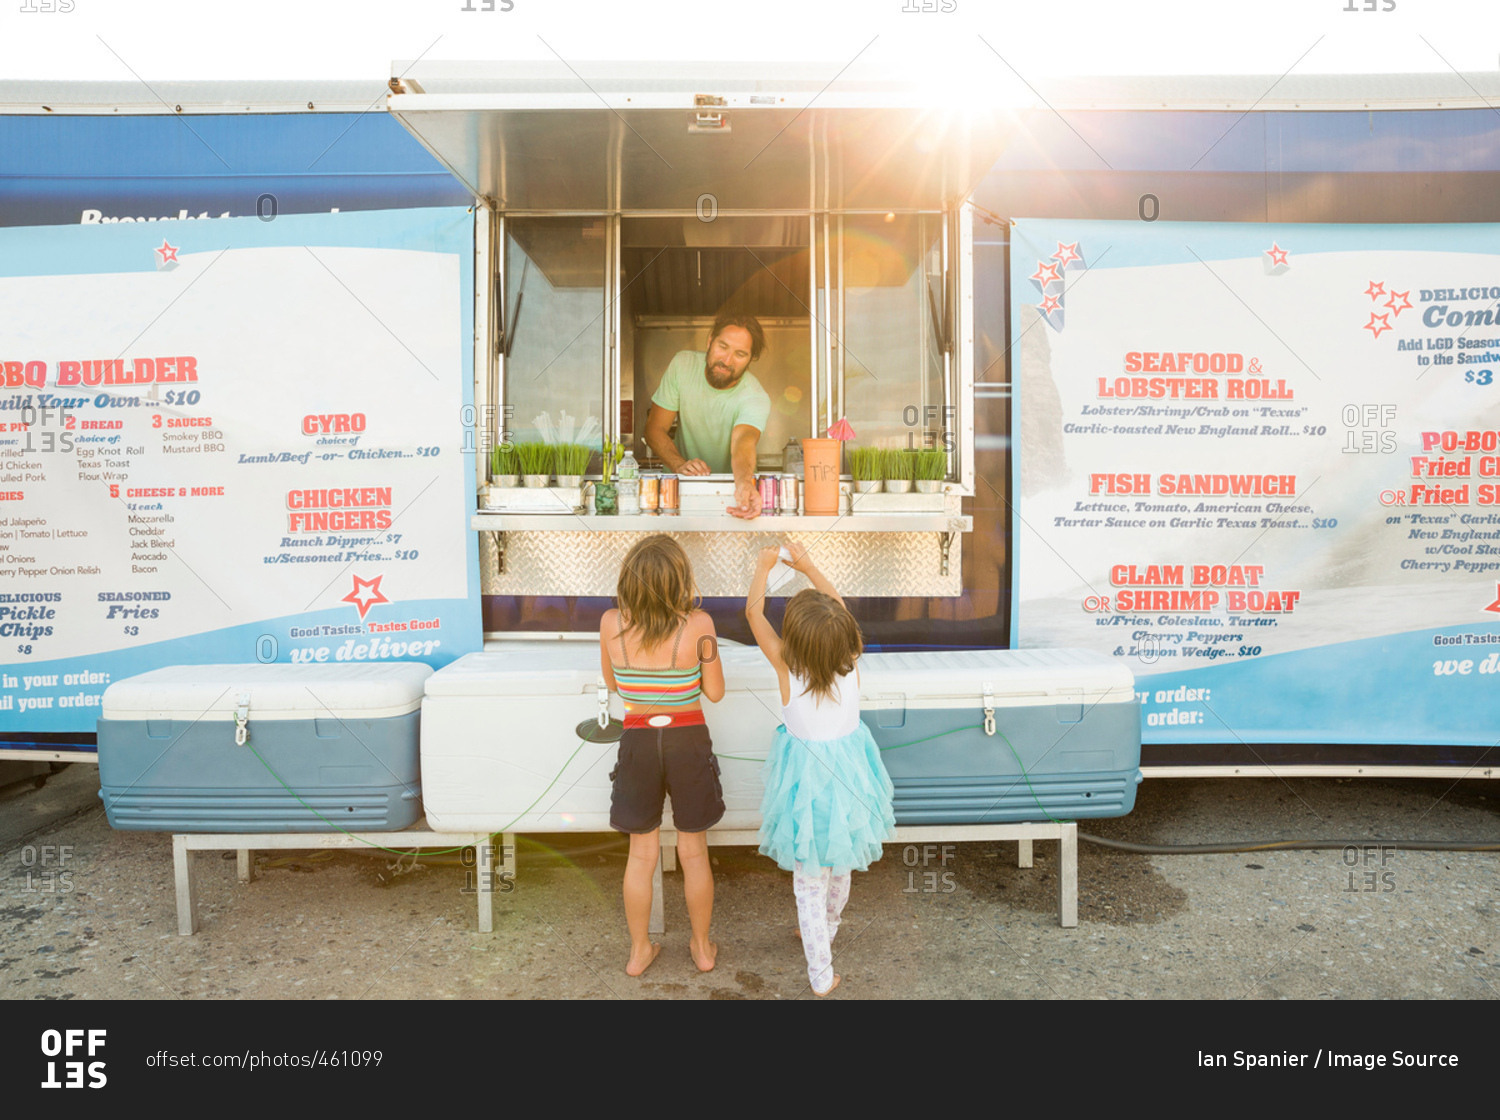 Man in fast food trailer serving two young girls beside trailer